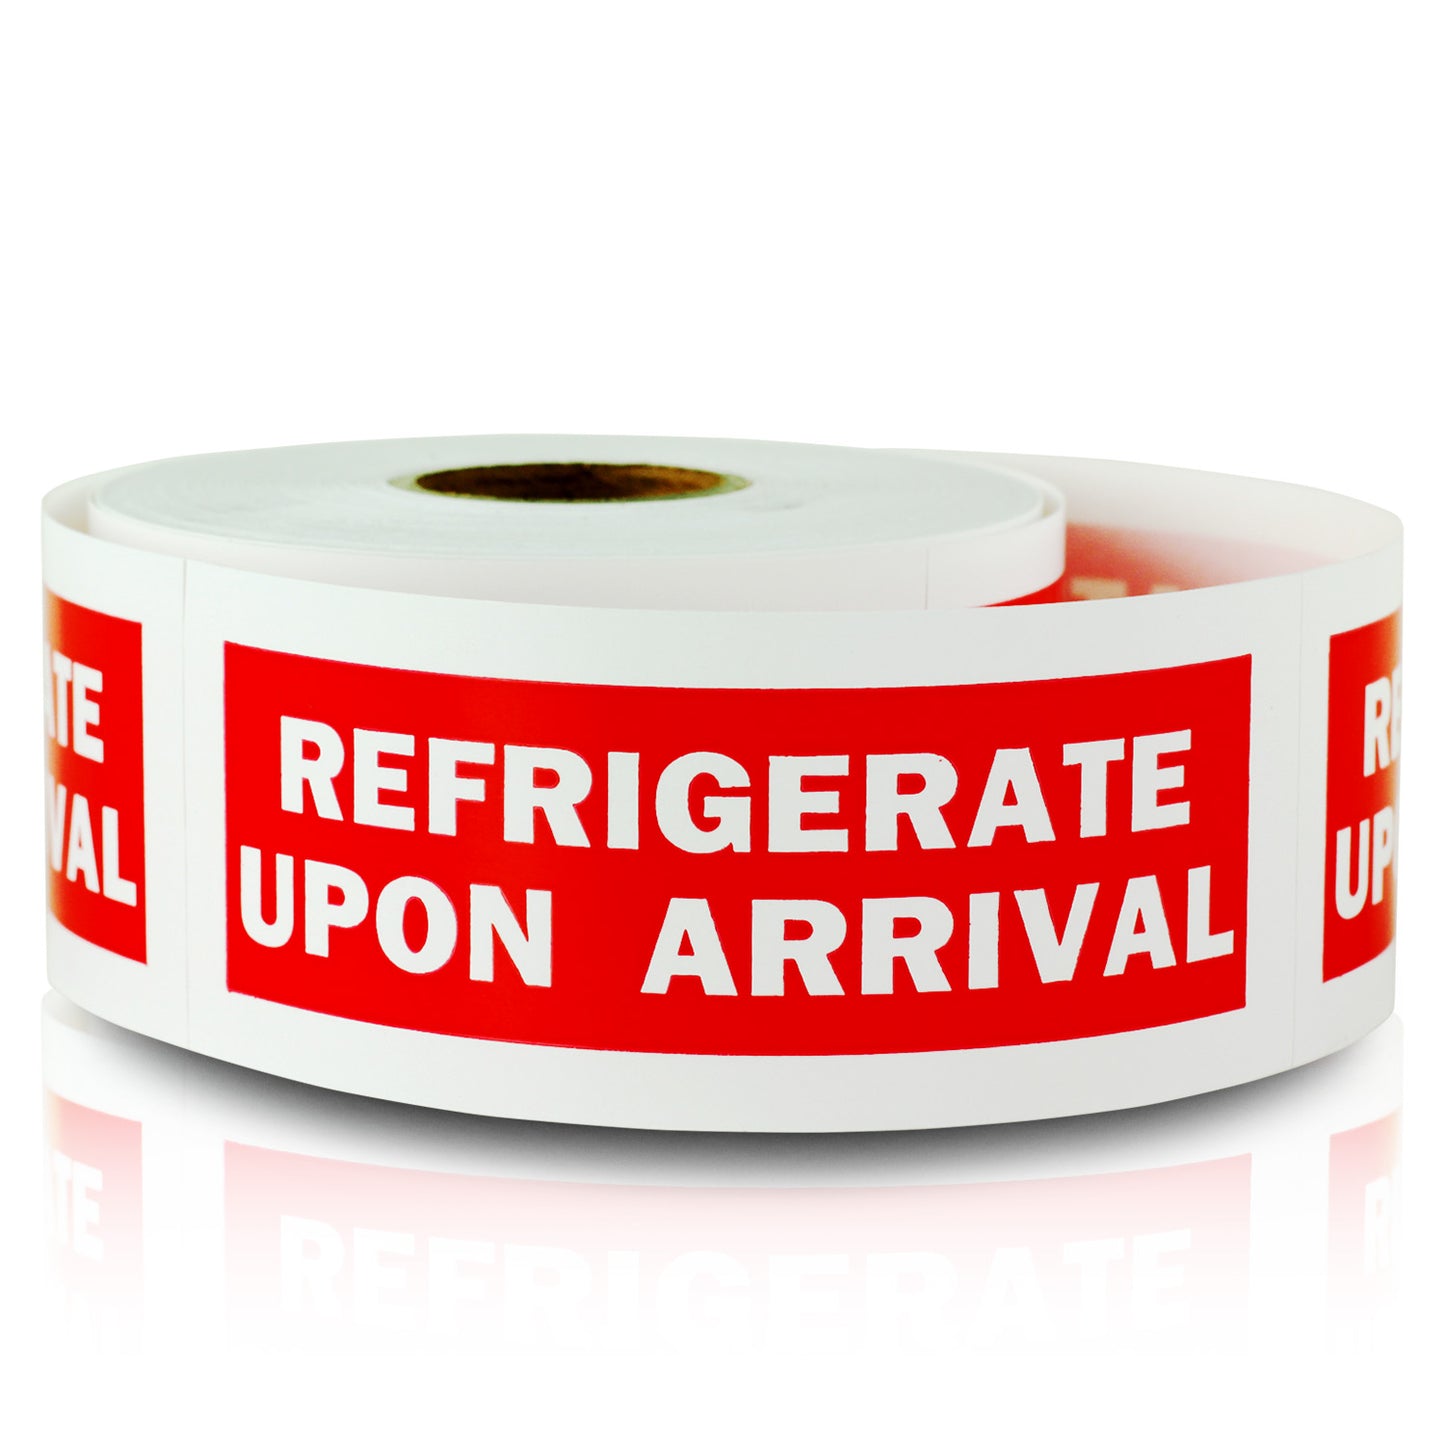 4 x 1.5 inch | Shipping & Handling: Refrigerate Upon Arrival Stickers